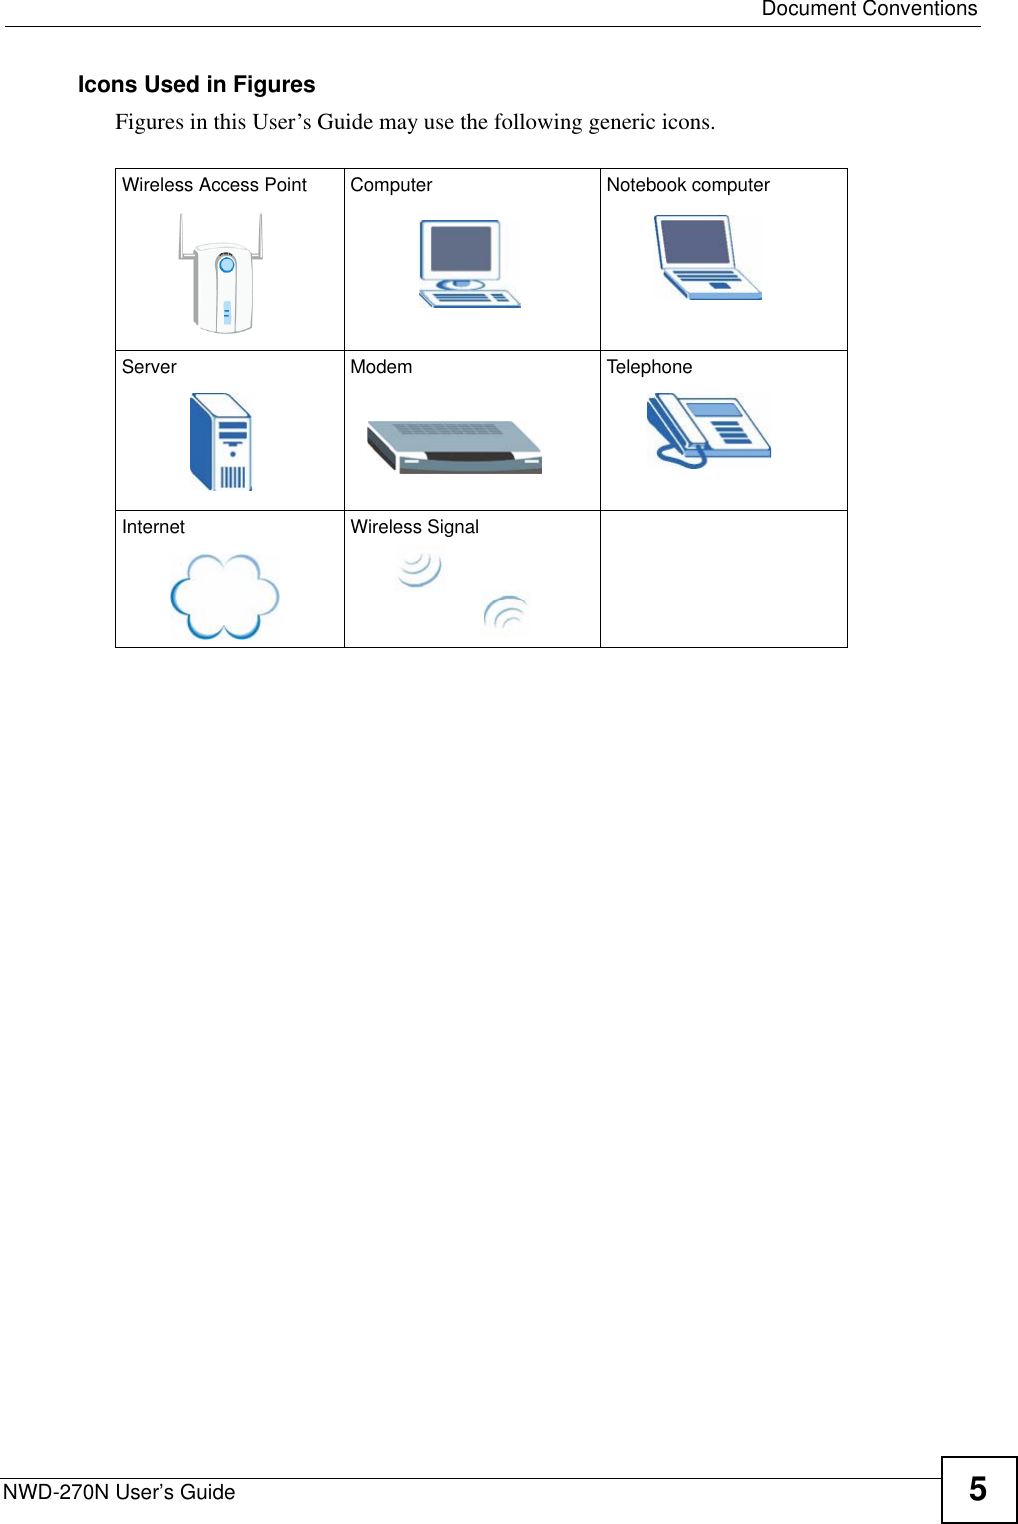  Document ConventionsNWD-270N User’s Guide 5Icons Used in FiguresFigures in this User’s Guide may use the following generic icons. Wireless Access Point Computer Notebook computerServer Modem TelephoneInternet Wireless Signal